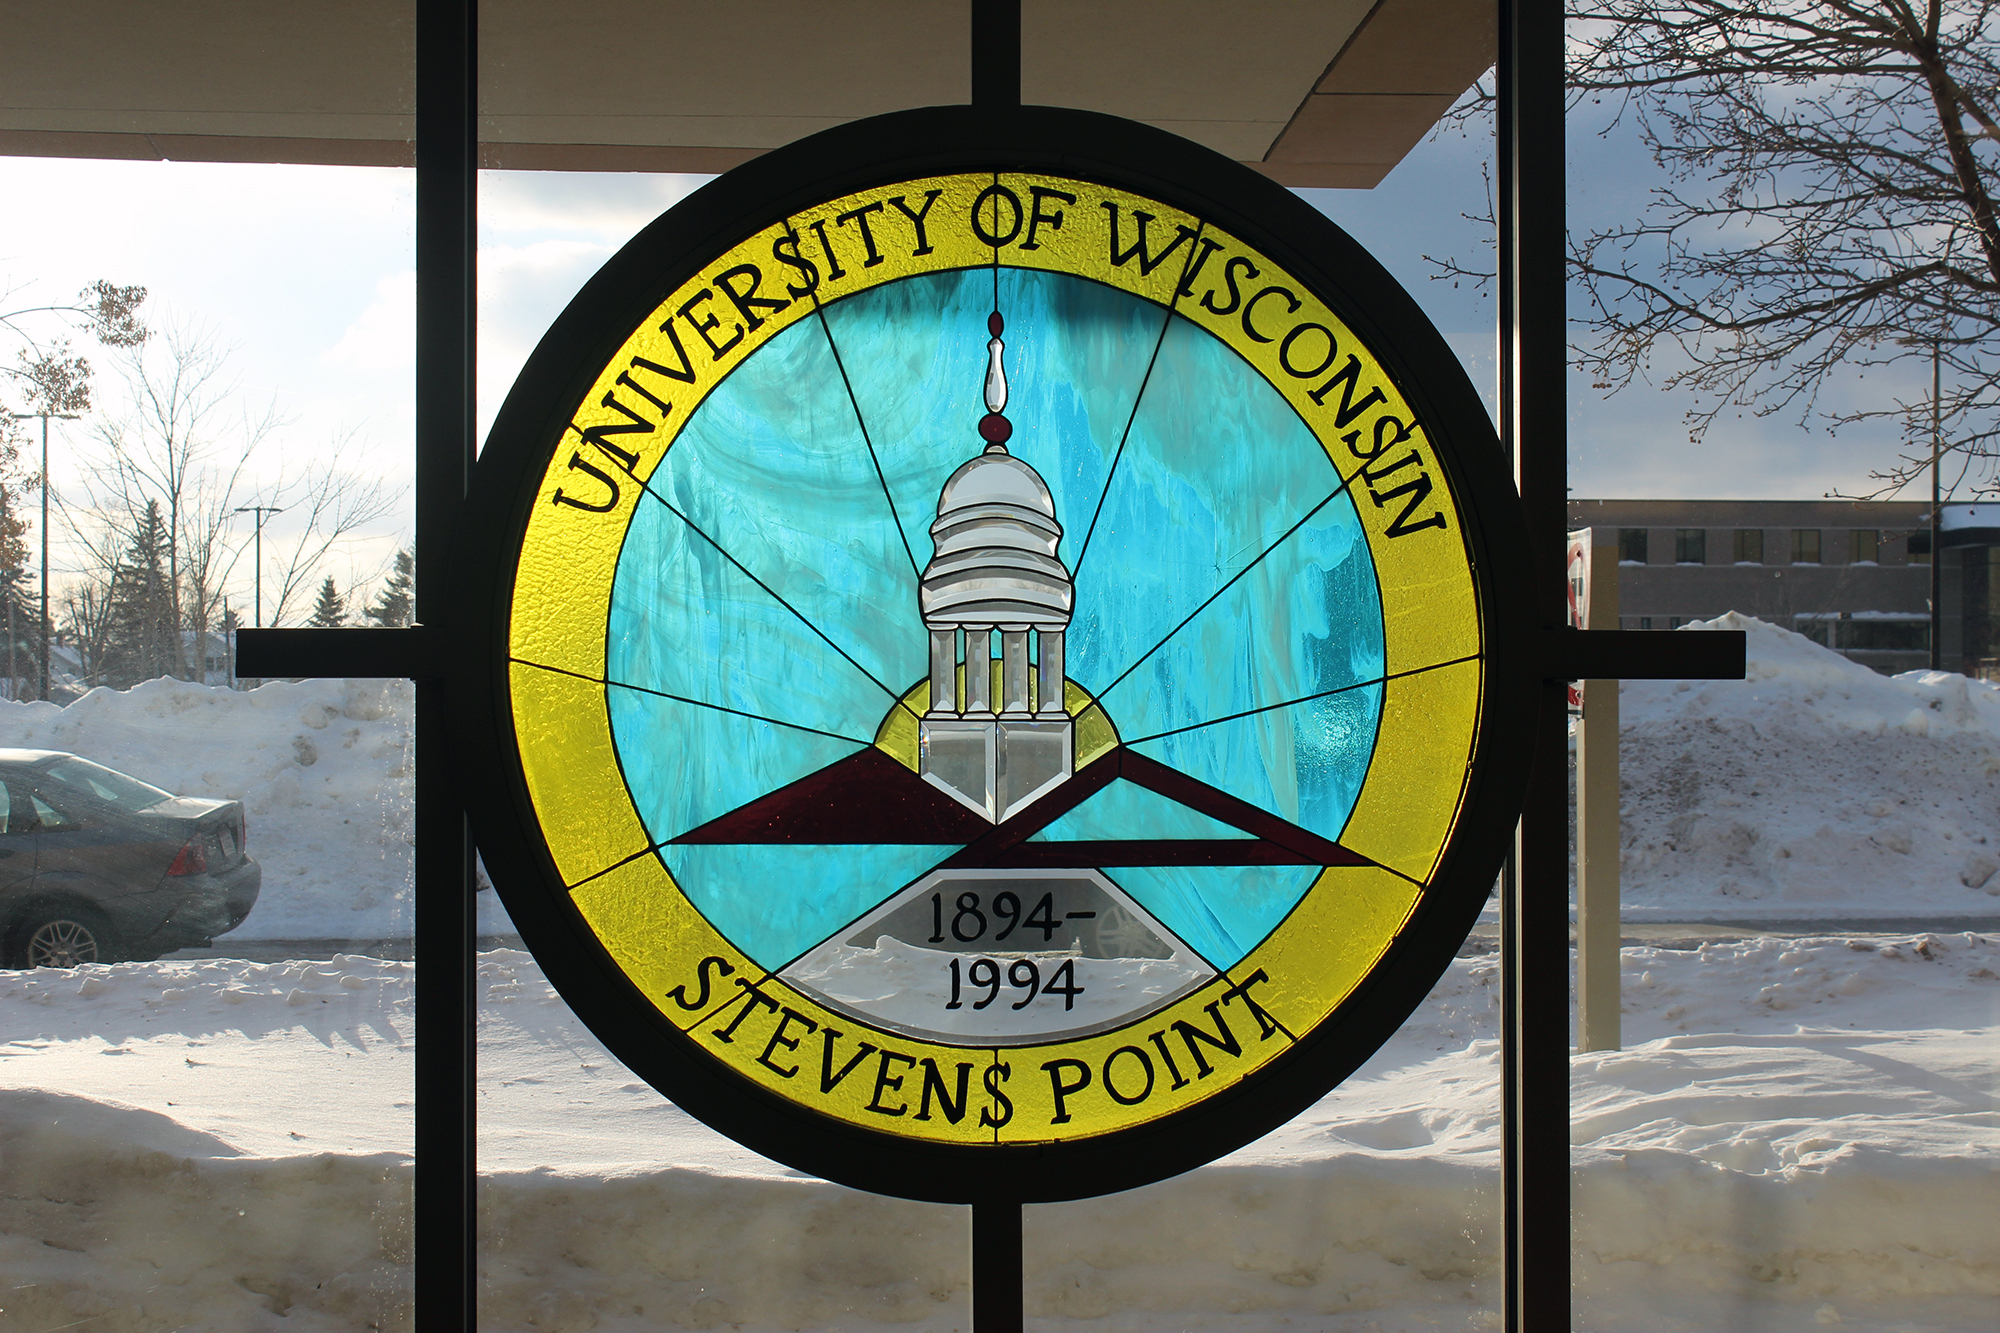 Stained glass art at UW-Stevens Point